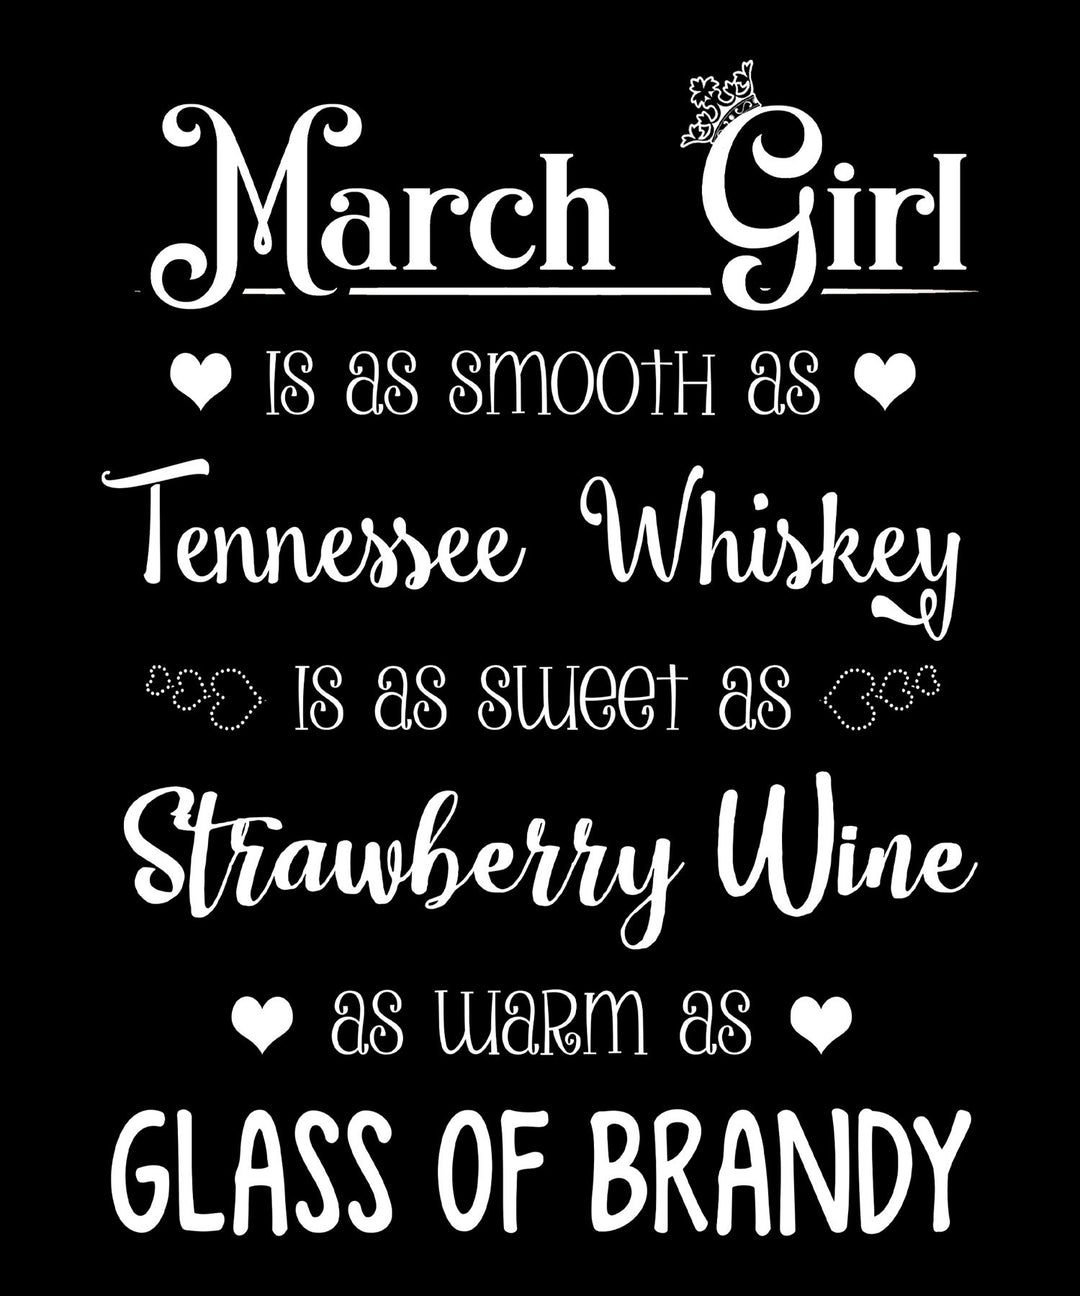 March Girl Is As Smooth As Whiskey.........As Warm As Brandy" 50% Off for B'day Girls. Flat Shipping